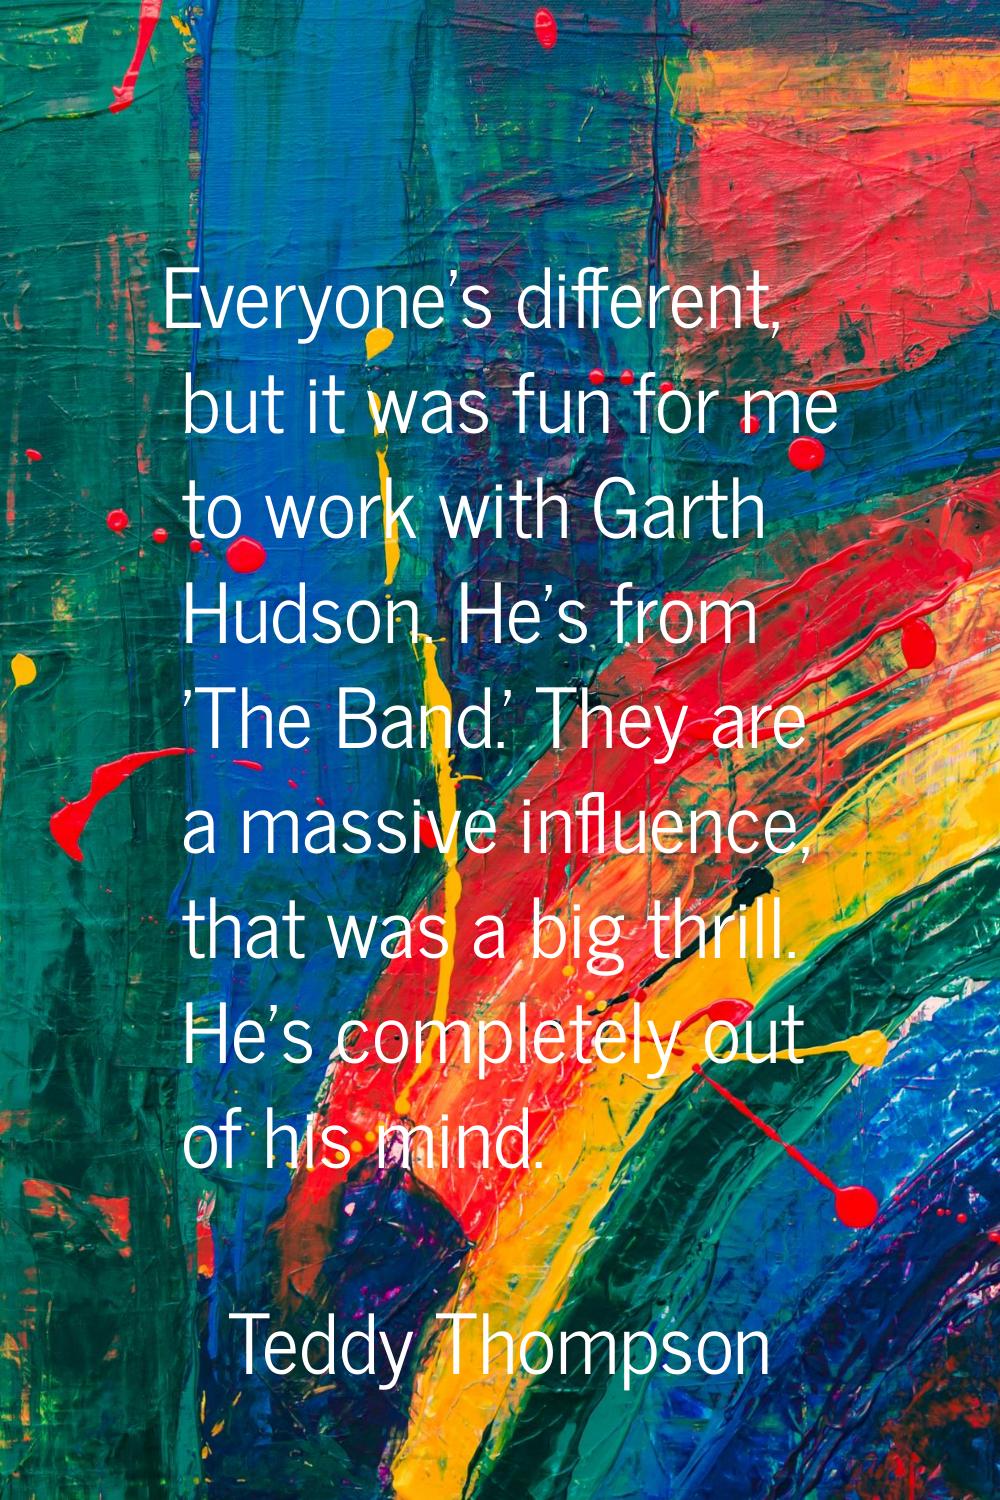 Everyone's different, but it was fun for me to work with Garth Hudson. He's from 'The Band.' They a